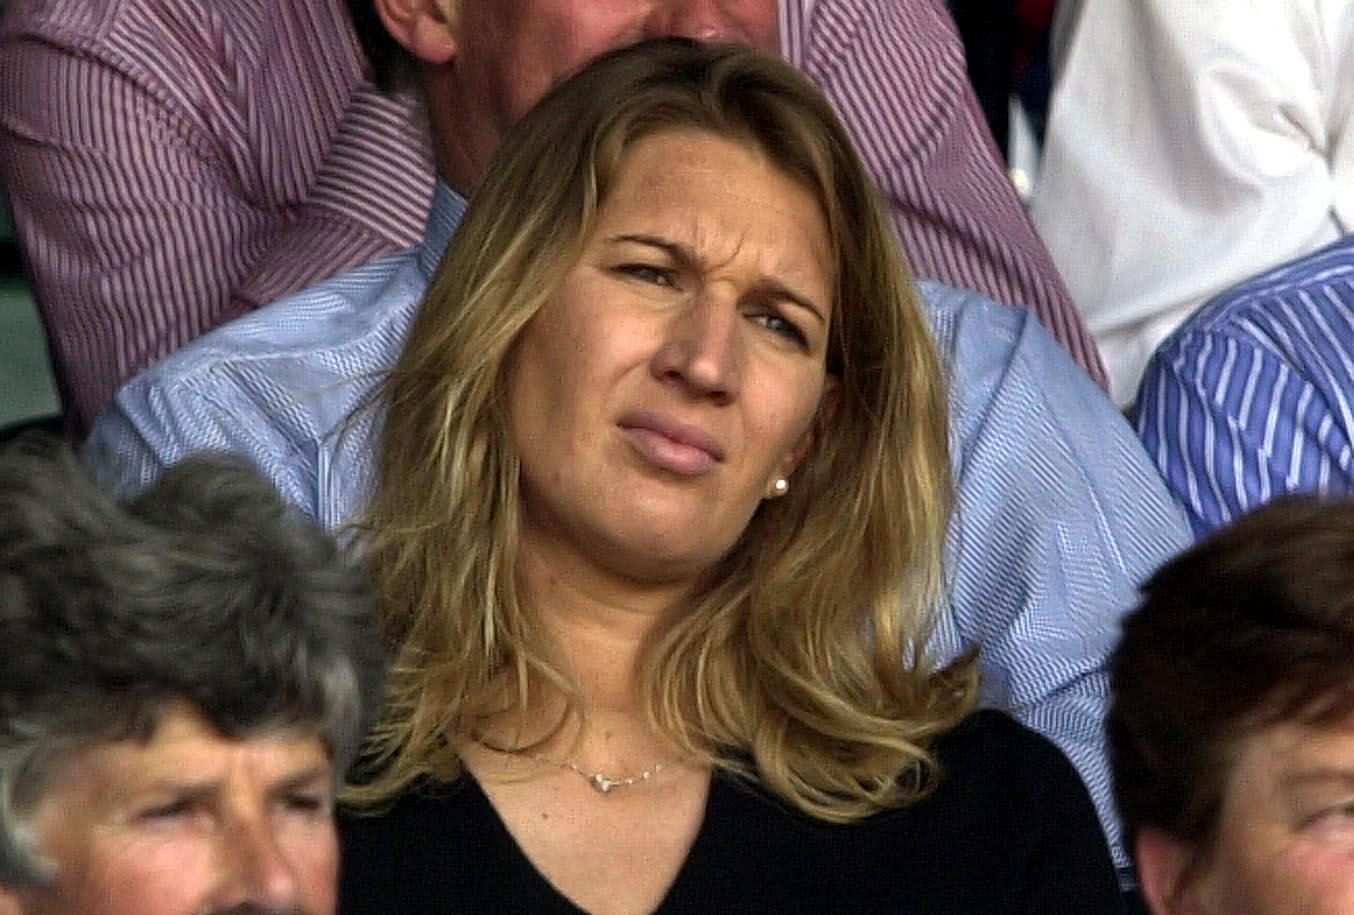 Steffi Graf was devastated by the attack on Monica Seles